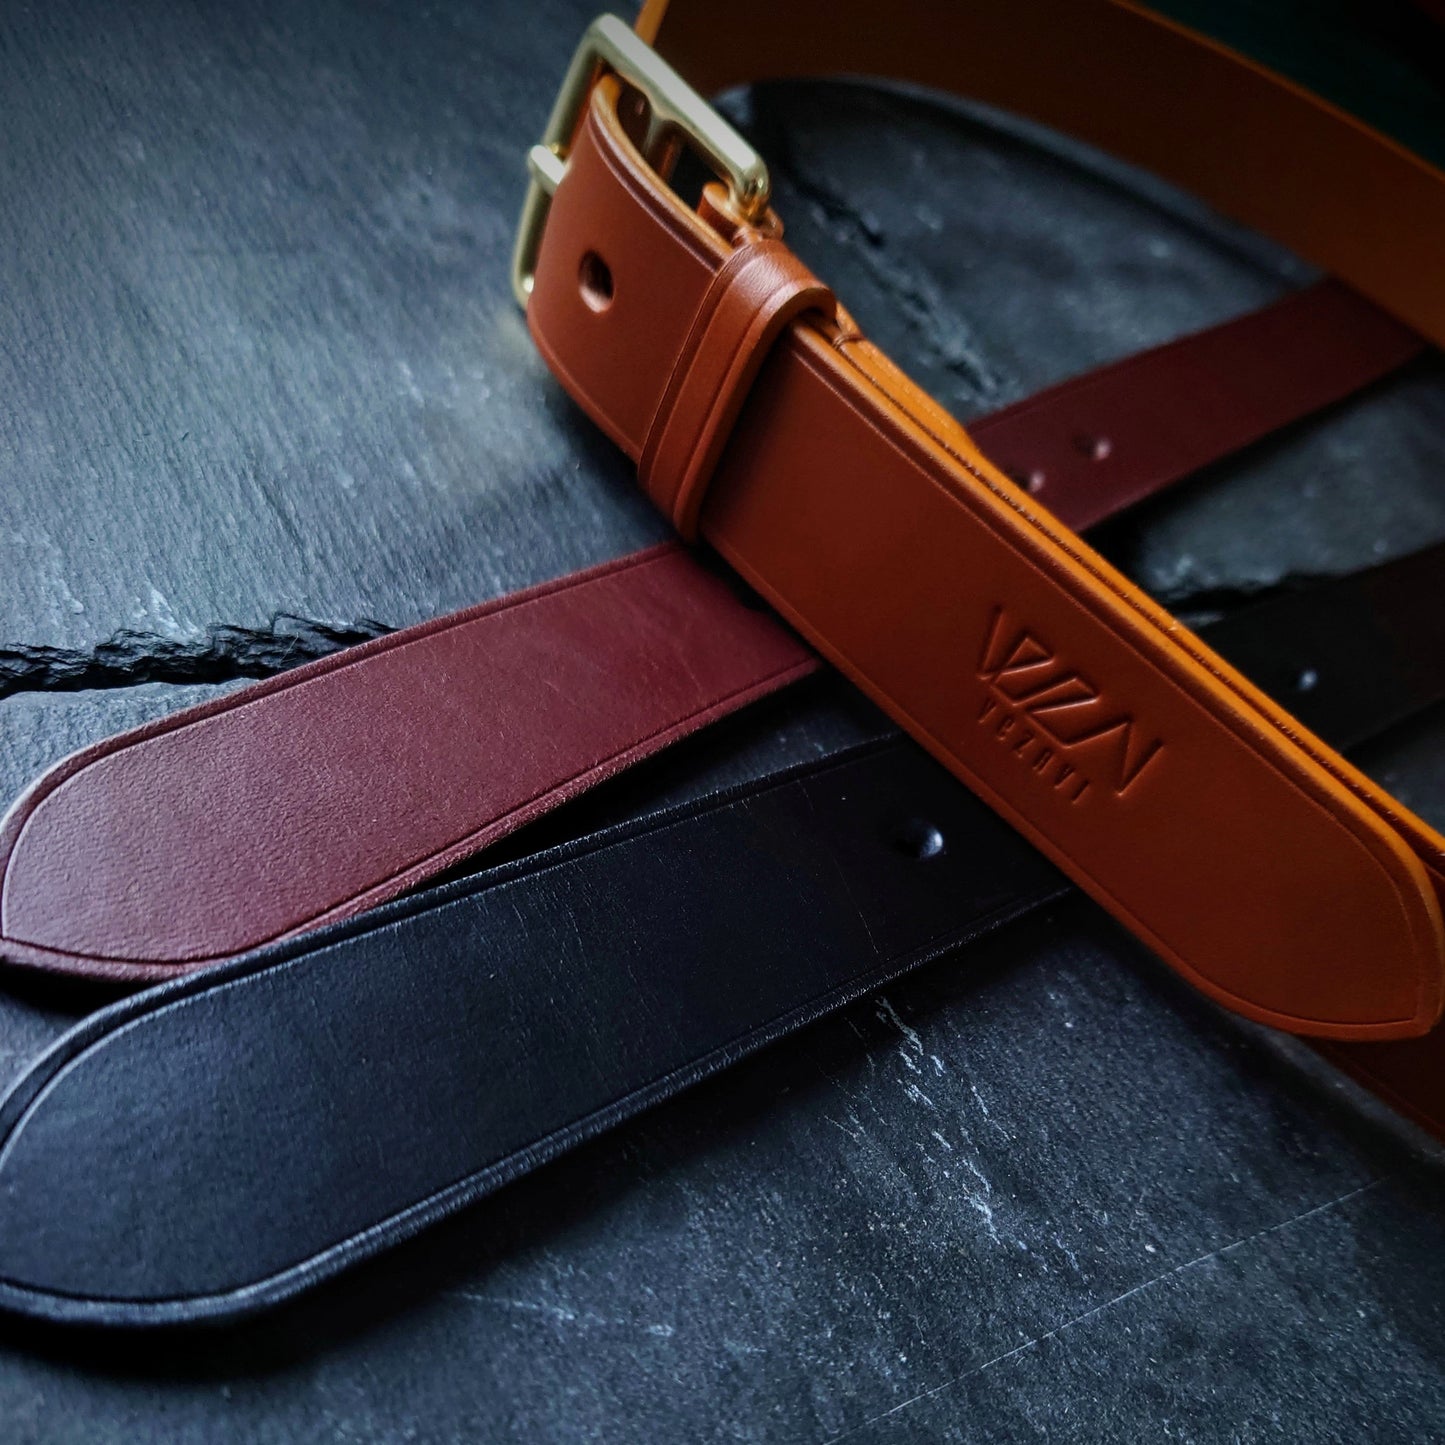 The Classic British Collection Bridle belt